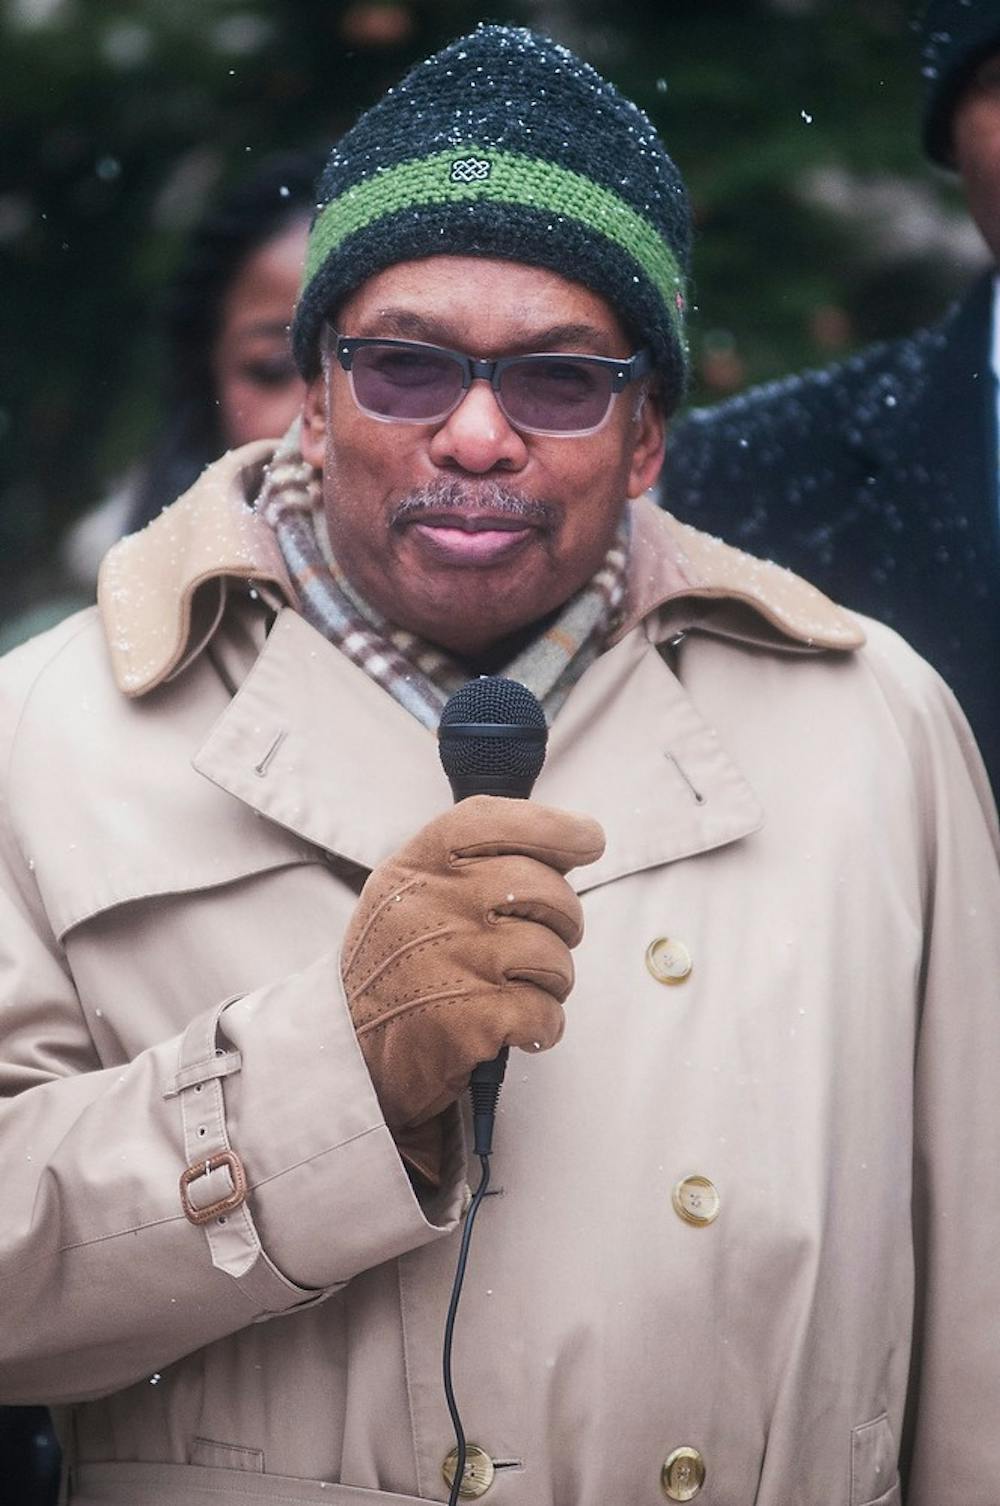 	<p><span class="caps">MSU</span> alumnus Ernest Green, of the Little Rock Nine, spoke to the marchers Jan. 20, 2014, at the Beaumont Tower. The march started from the <span class="caps">MSU</span> Union and ended at the Beaumont Tower. Erin Hampton/ The State News</p>